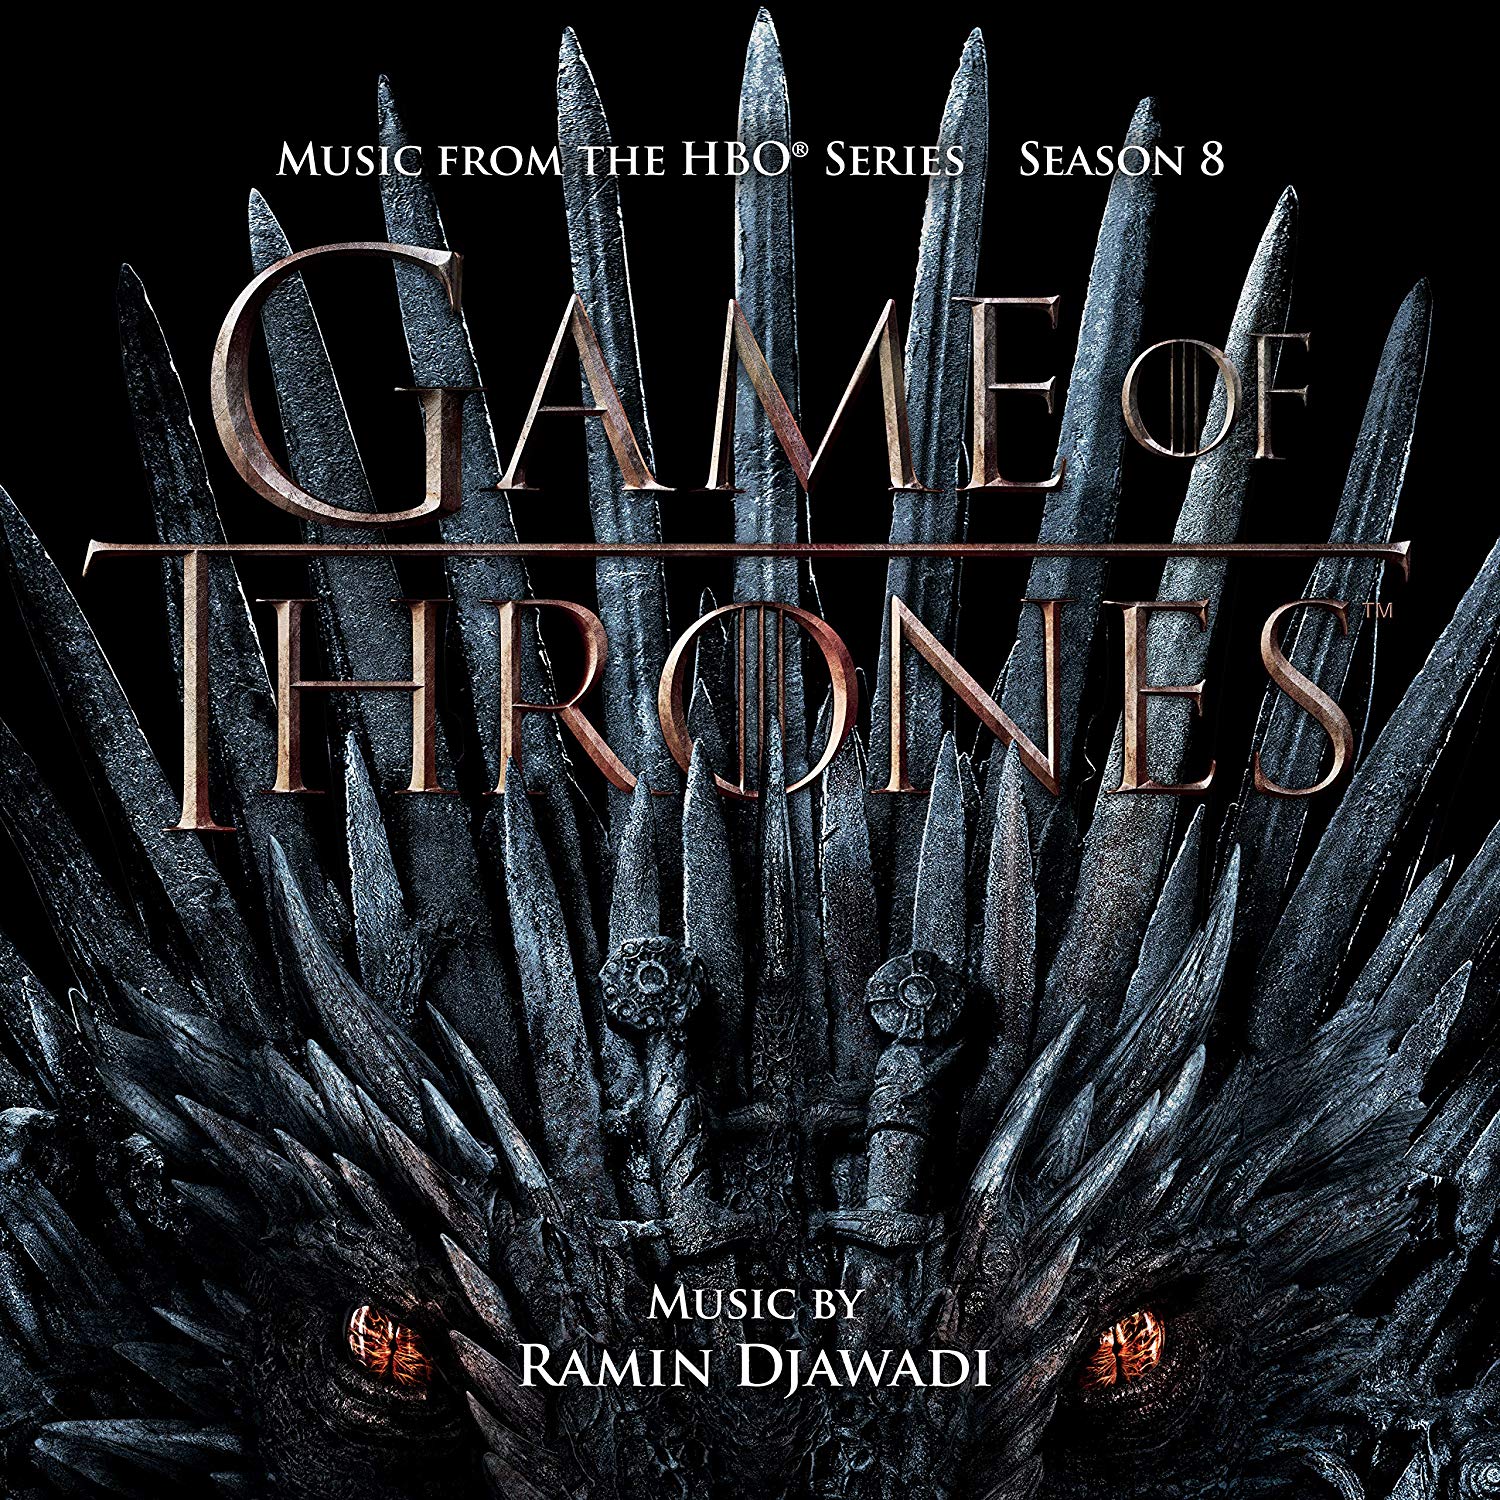 System of a Down’s Serj Tankian sings Game of Thrones track “The Rains of Castamere”